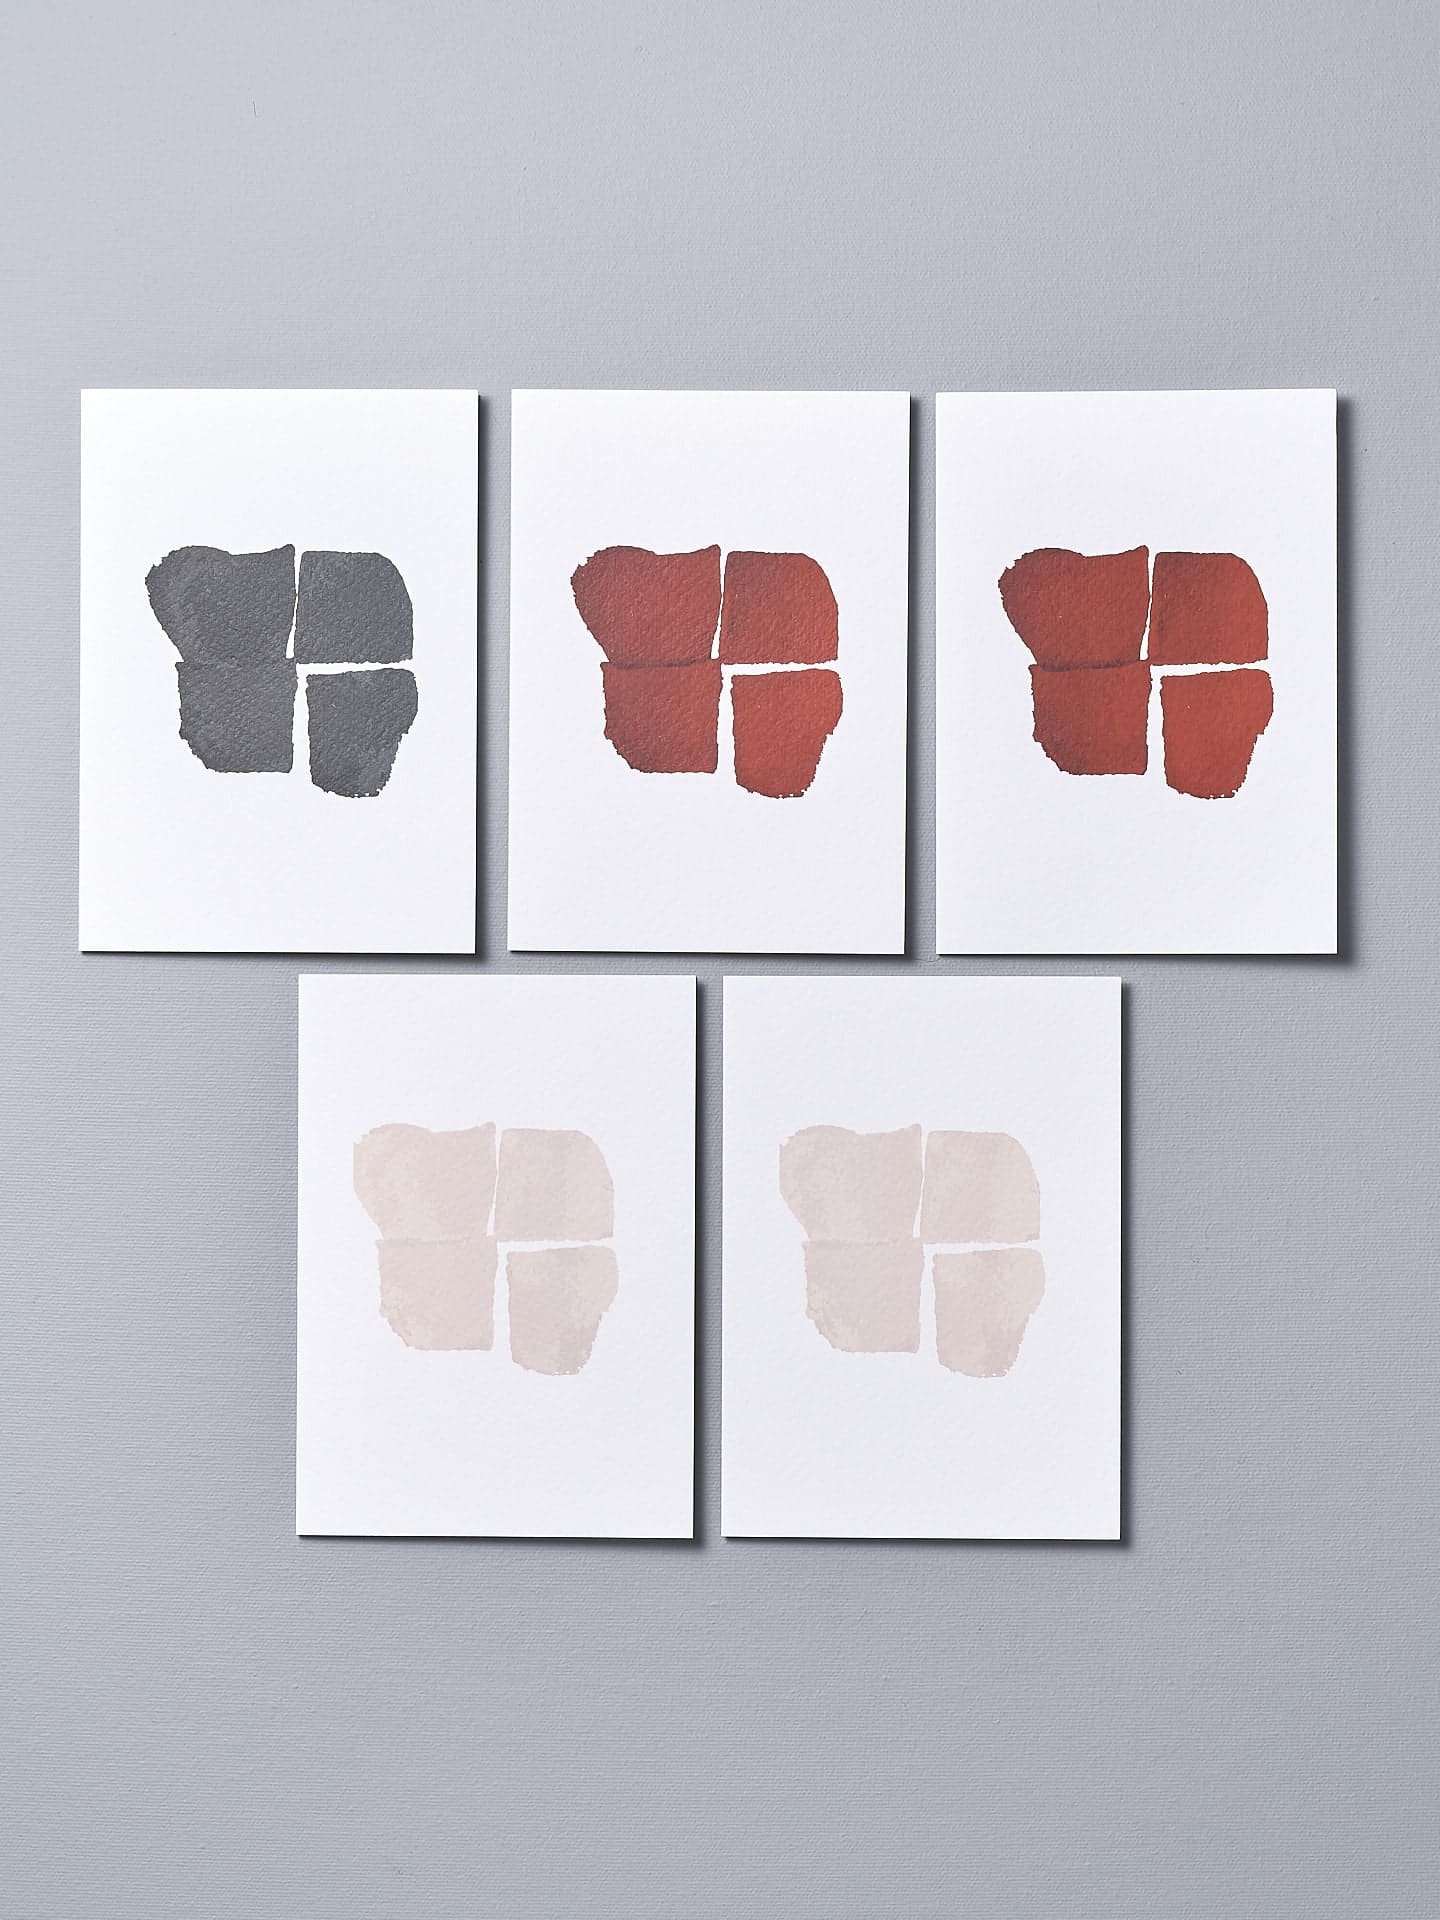 A set of four Greeting Cards – Heart Block by Walker & Bing on a grey background.